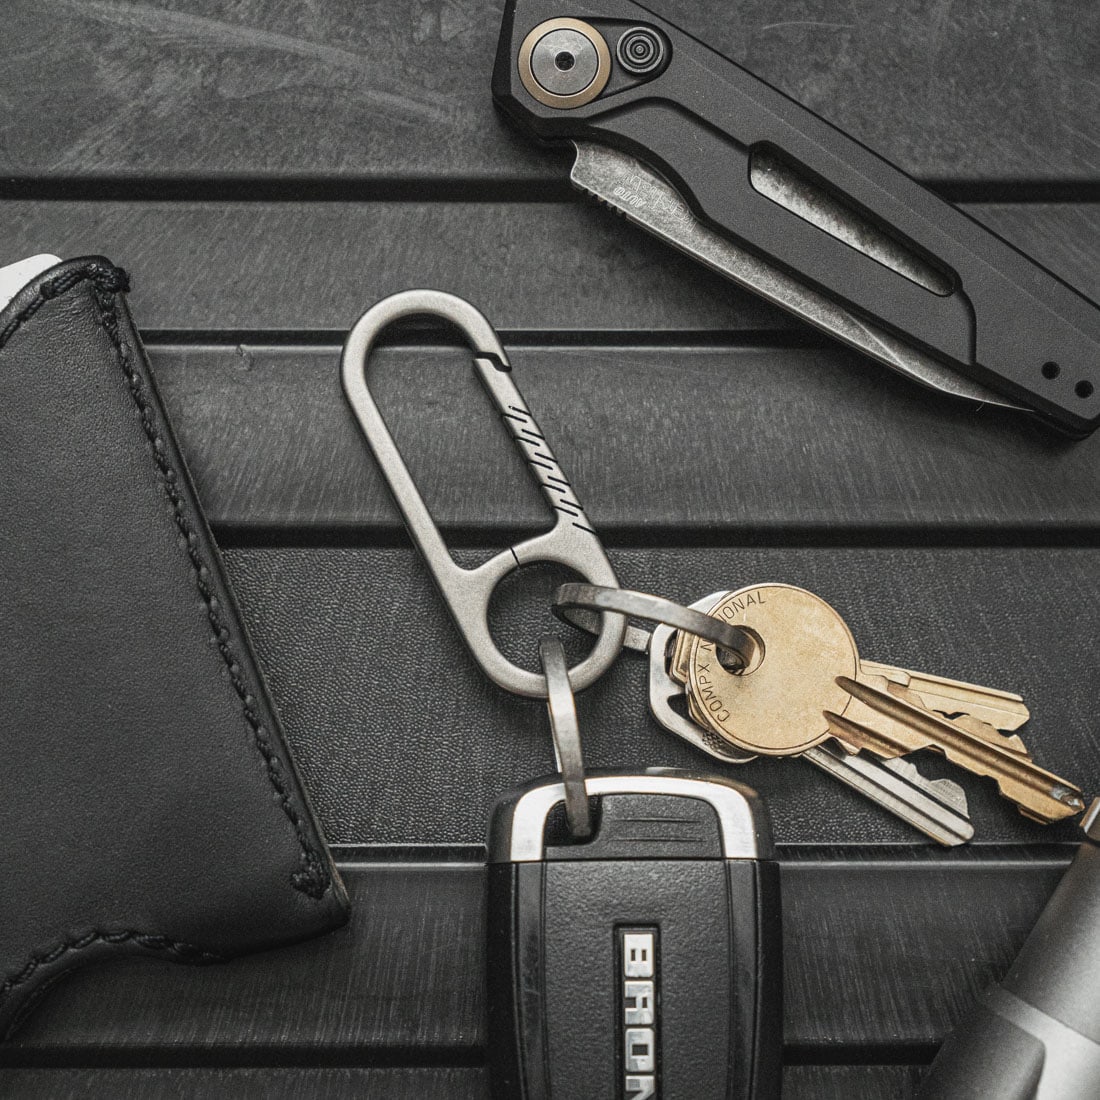 Imentha Titanium Key Rings - 6 Pieces in 3 Sizes for Keychains and  Carabiners - Durable, Versatile, and Ideal for Everyday Use